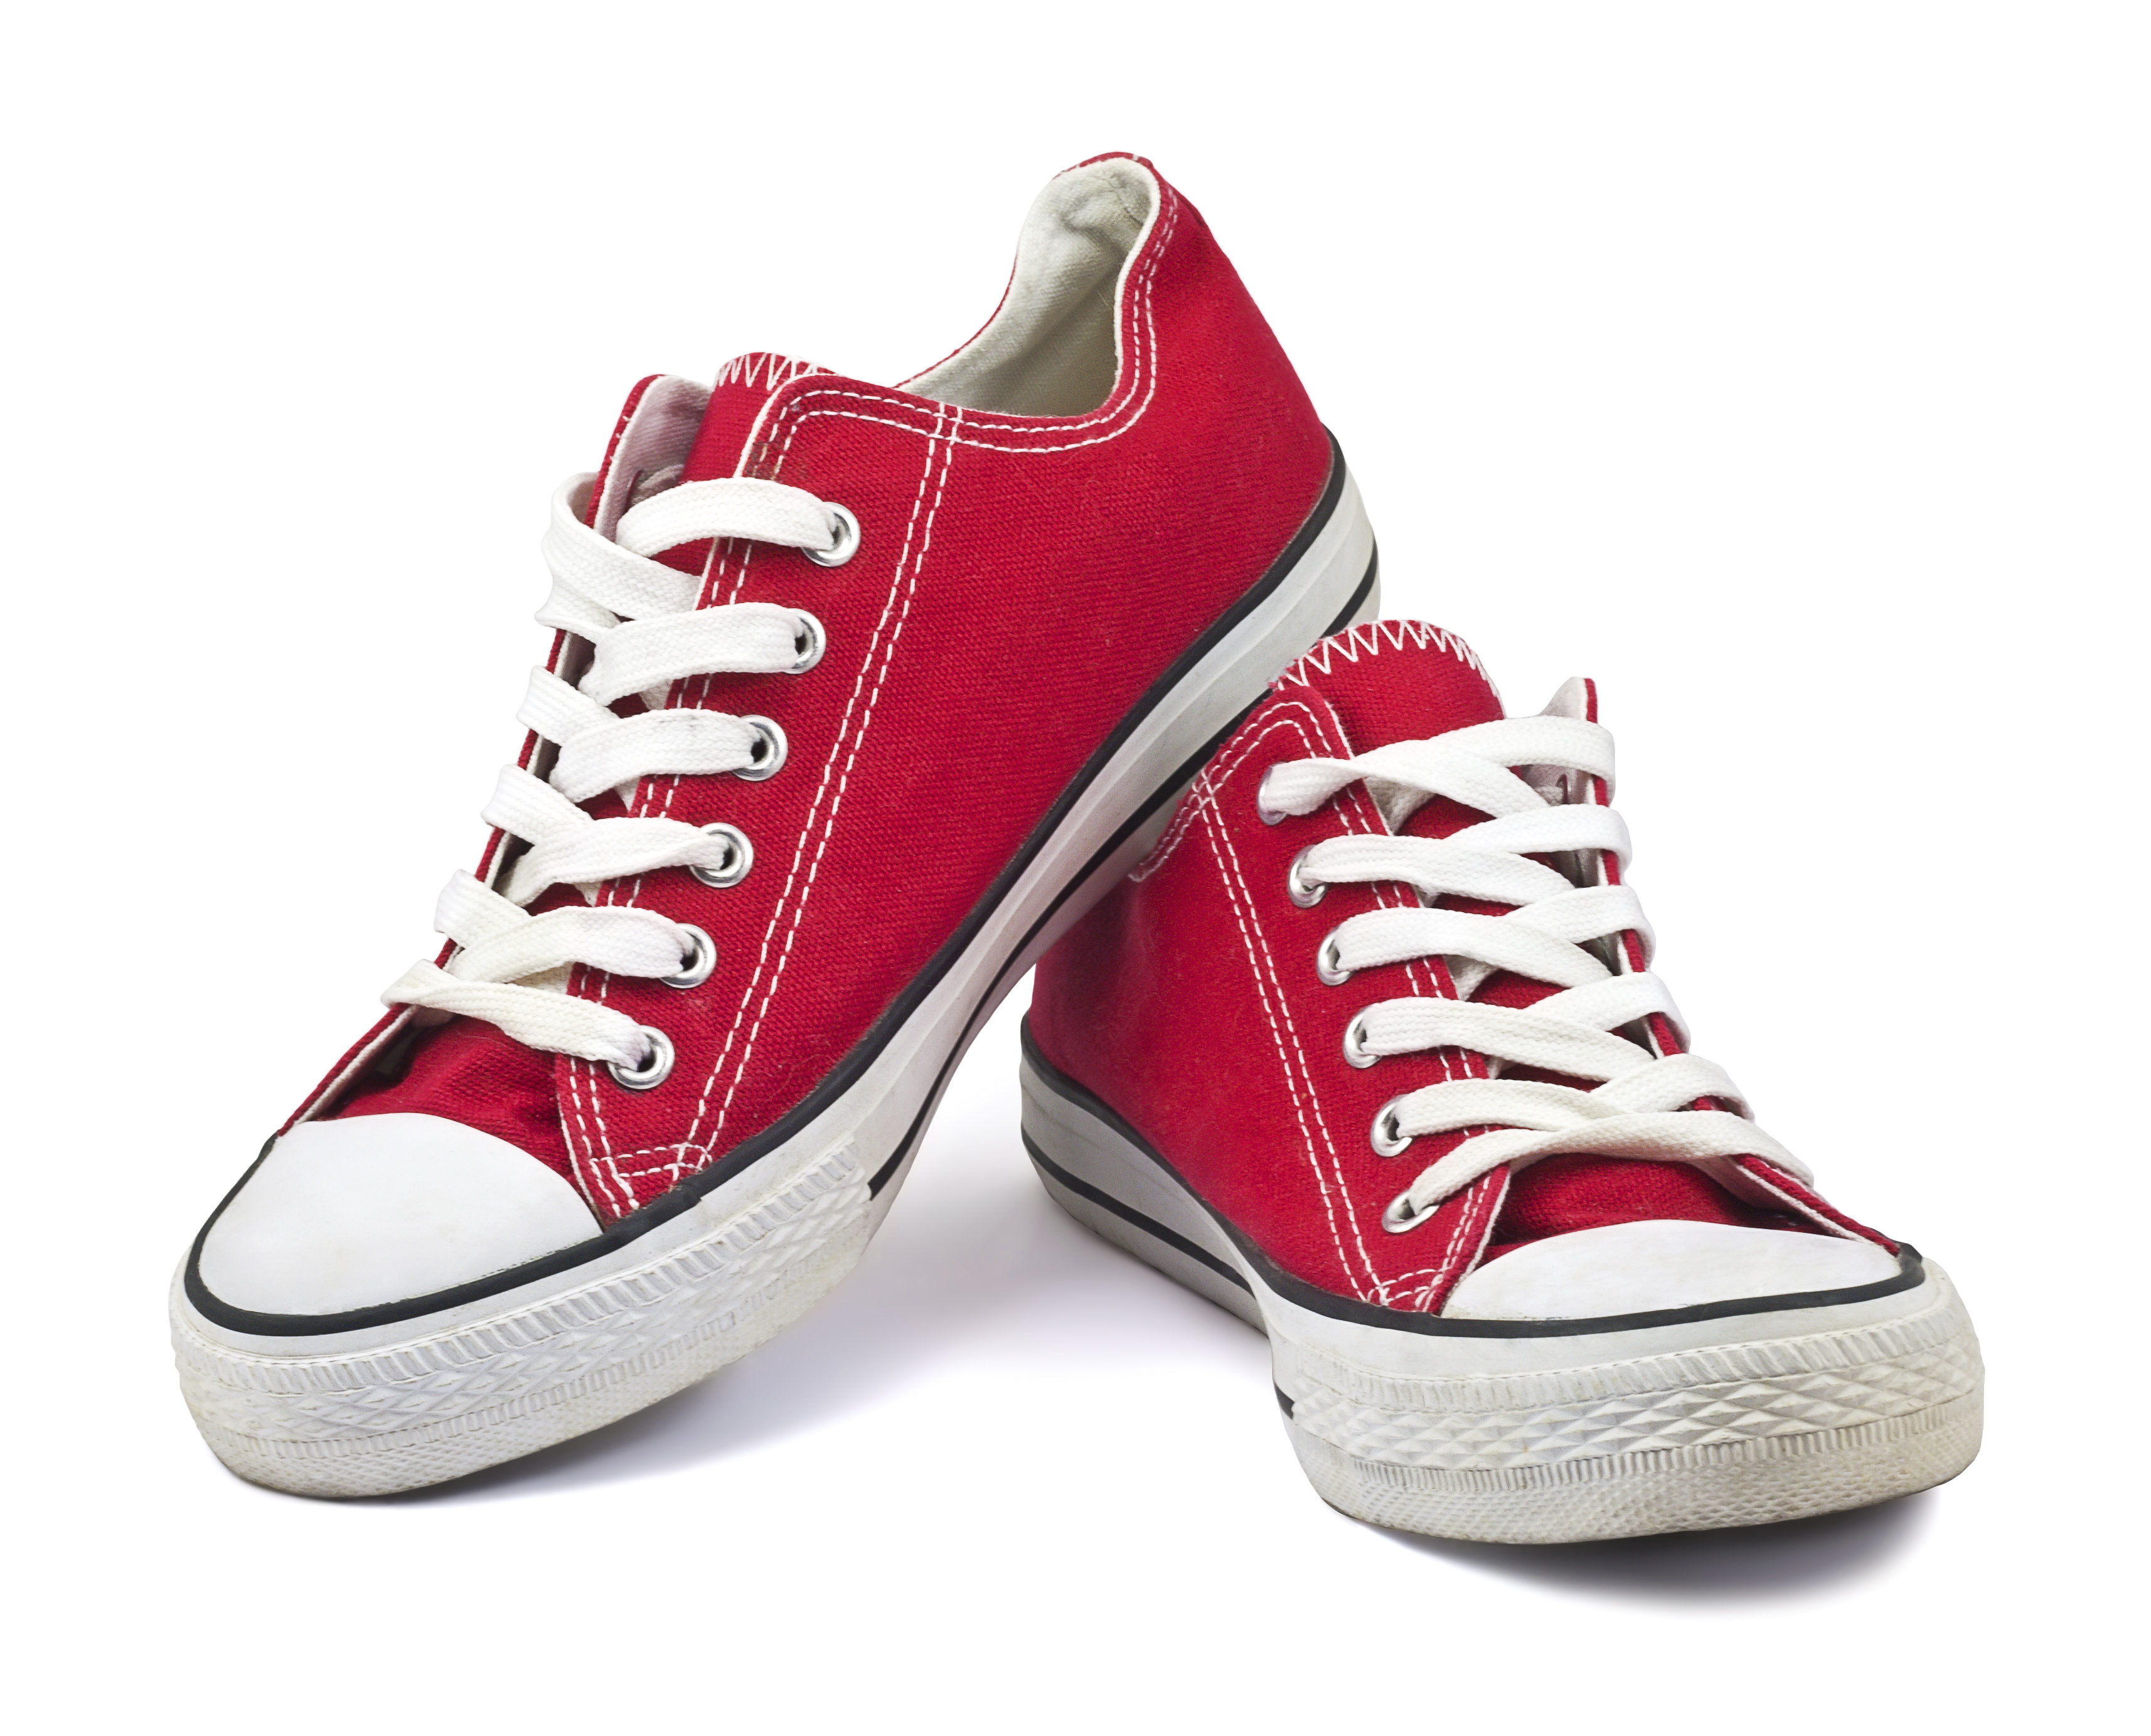 Red sneakers with white laces free image